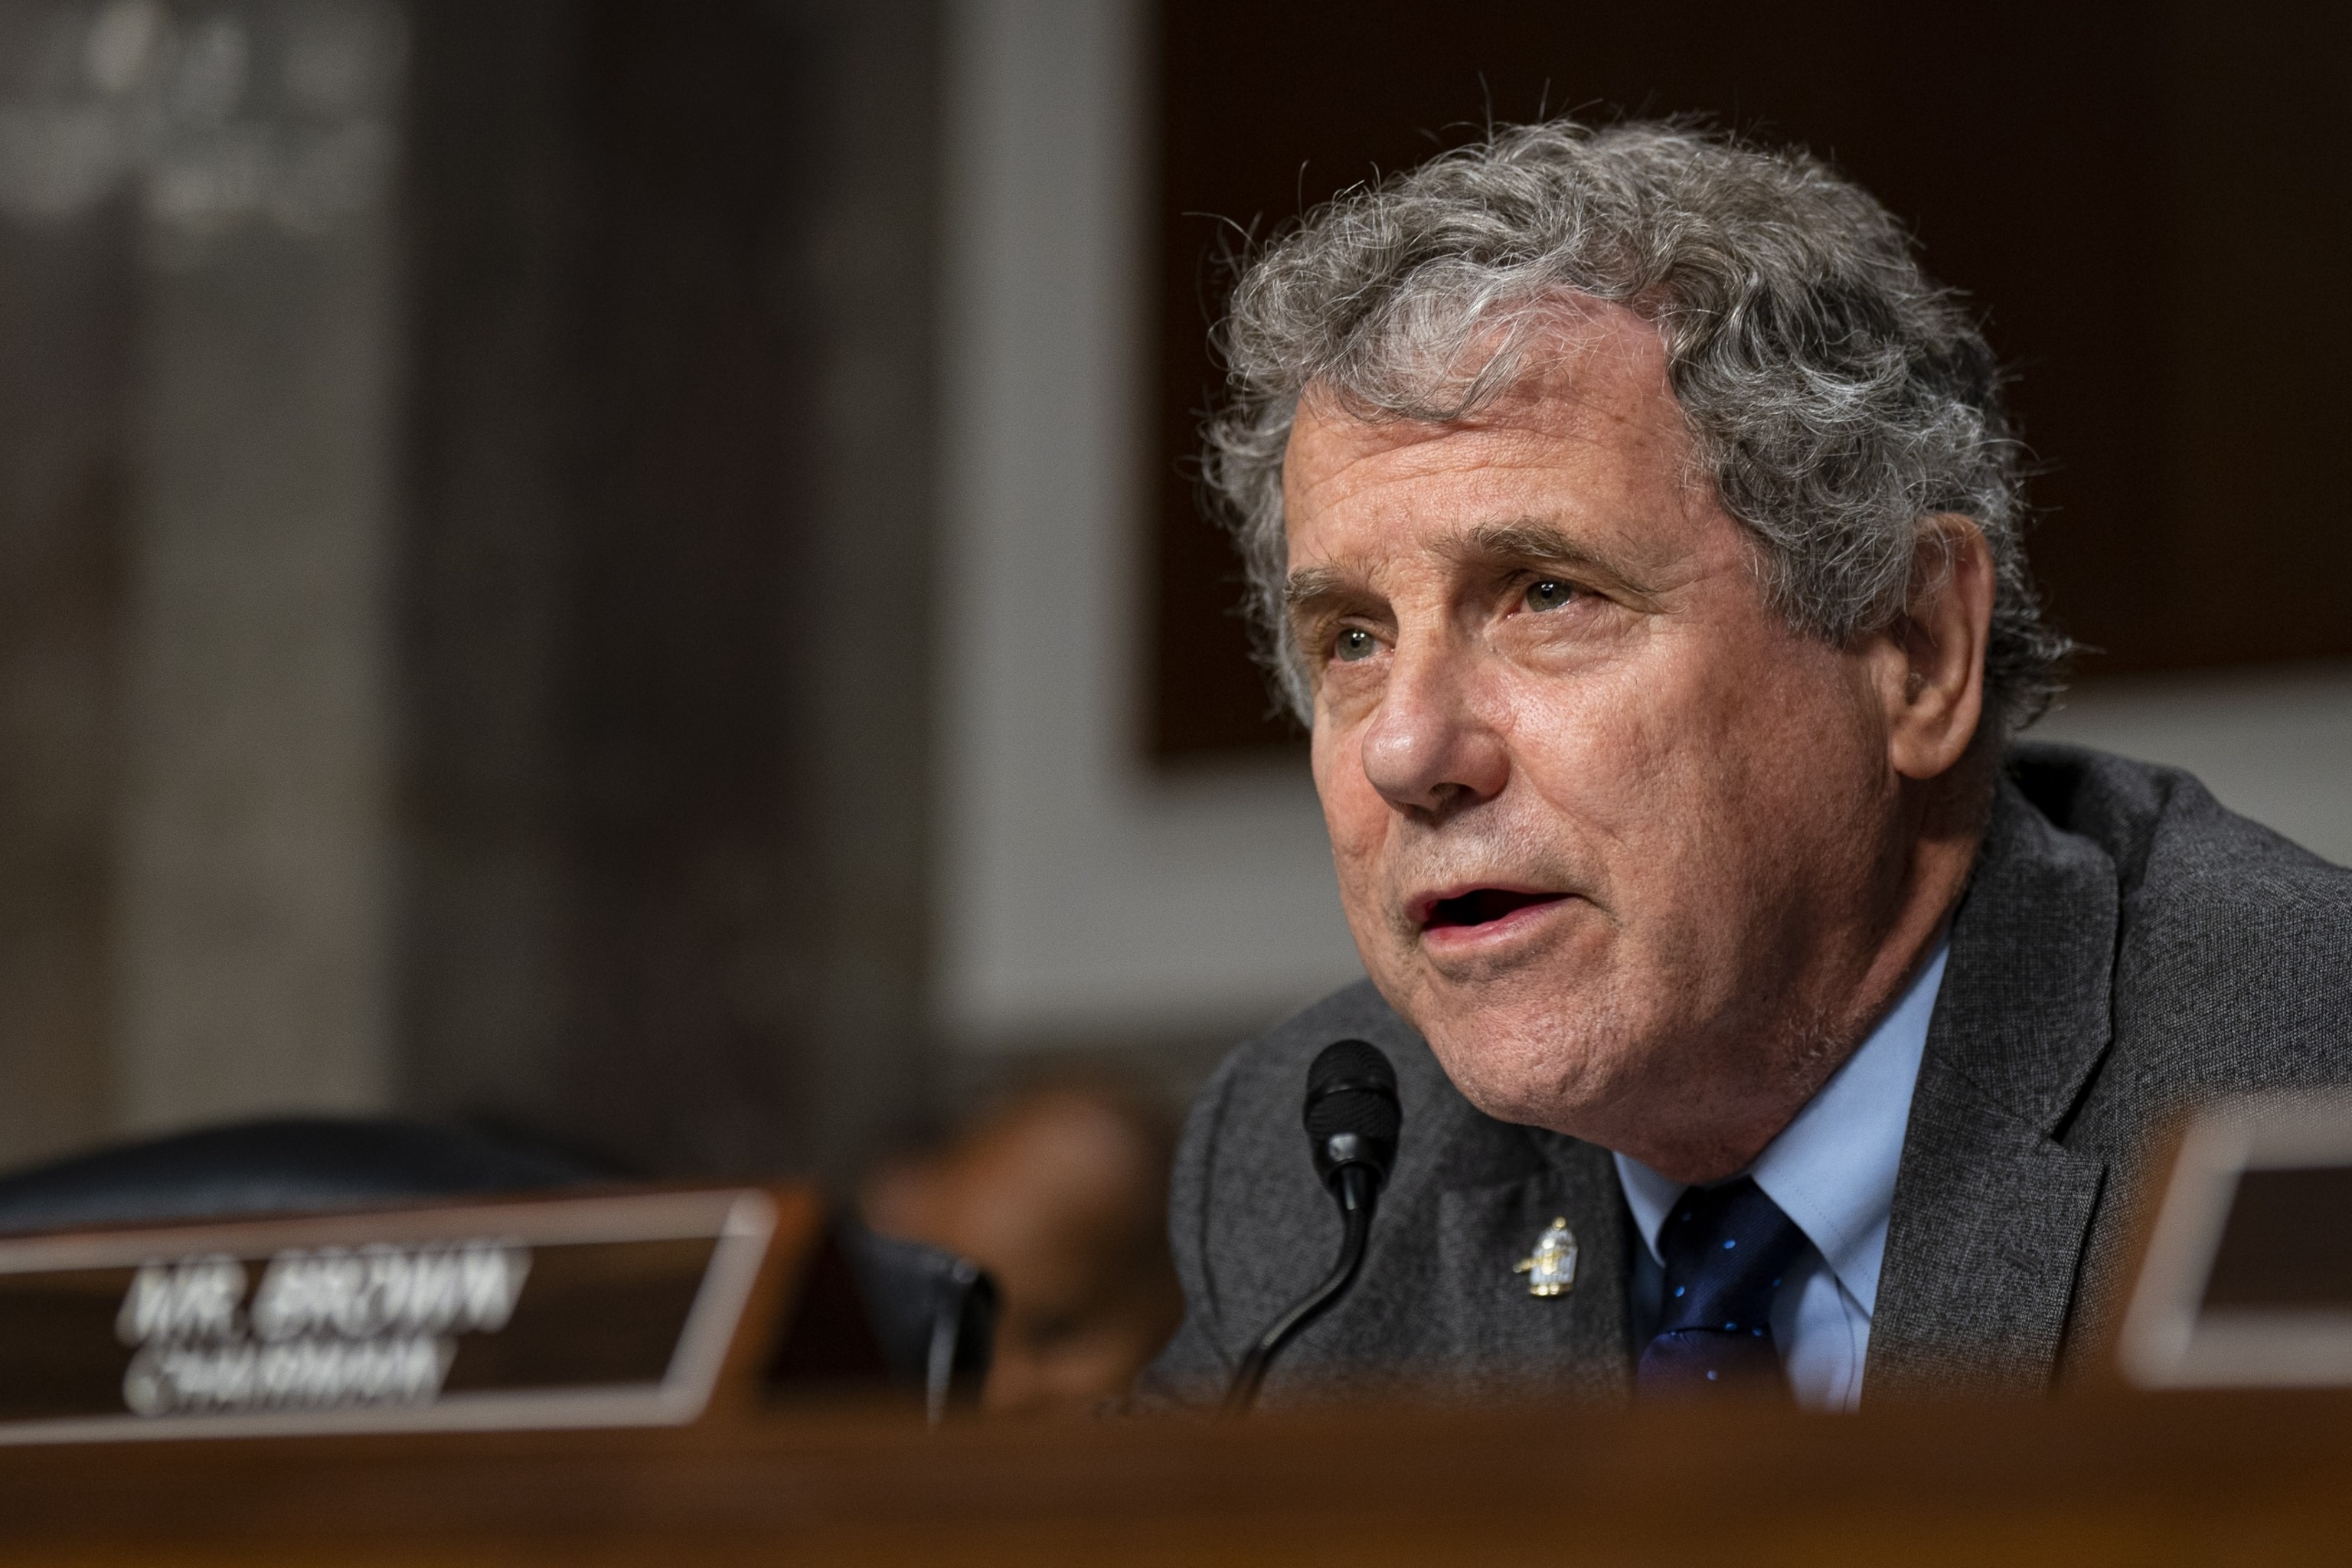 PHOTO: Senator Sherrod Brown, a Democrat from Ohio and chairman of the Senate Banking, Housing, and Urban Affairs Committee, speaks during a hearing in Washington, DC, US, on May 16, 2023.